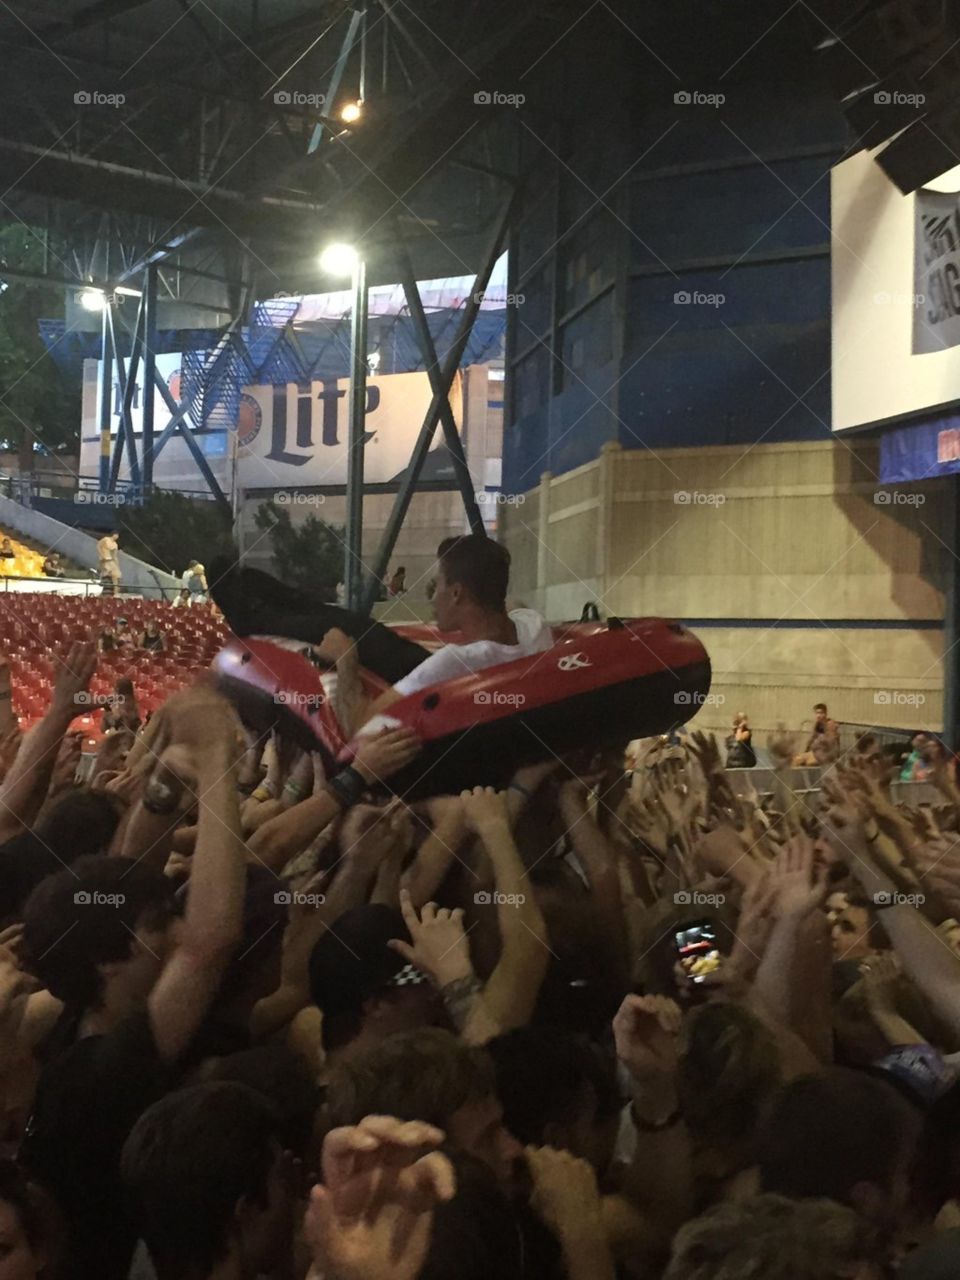 We Came As Romans crowd surfing